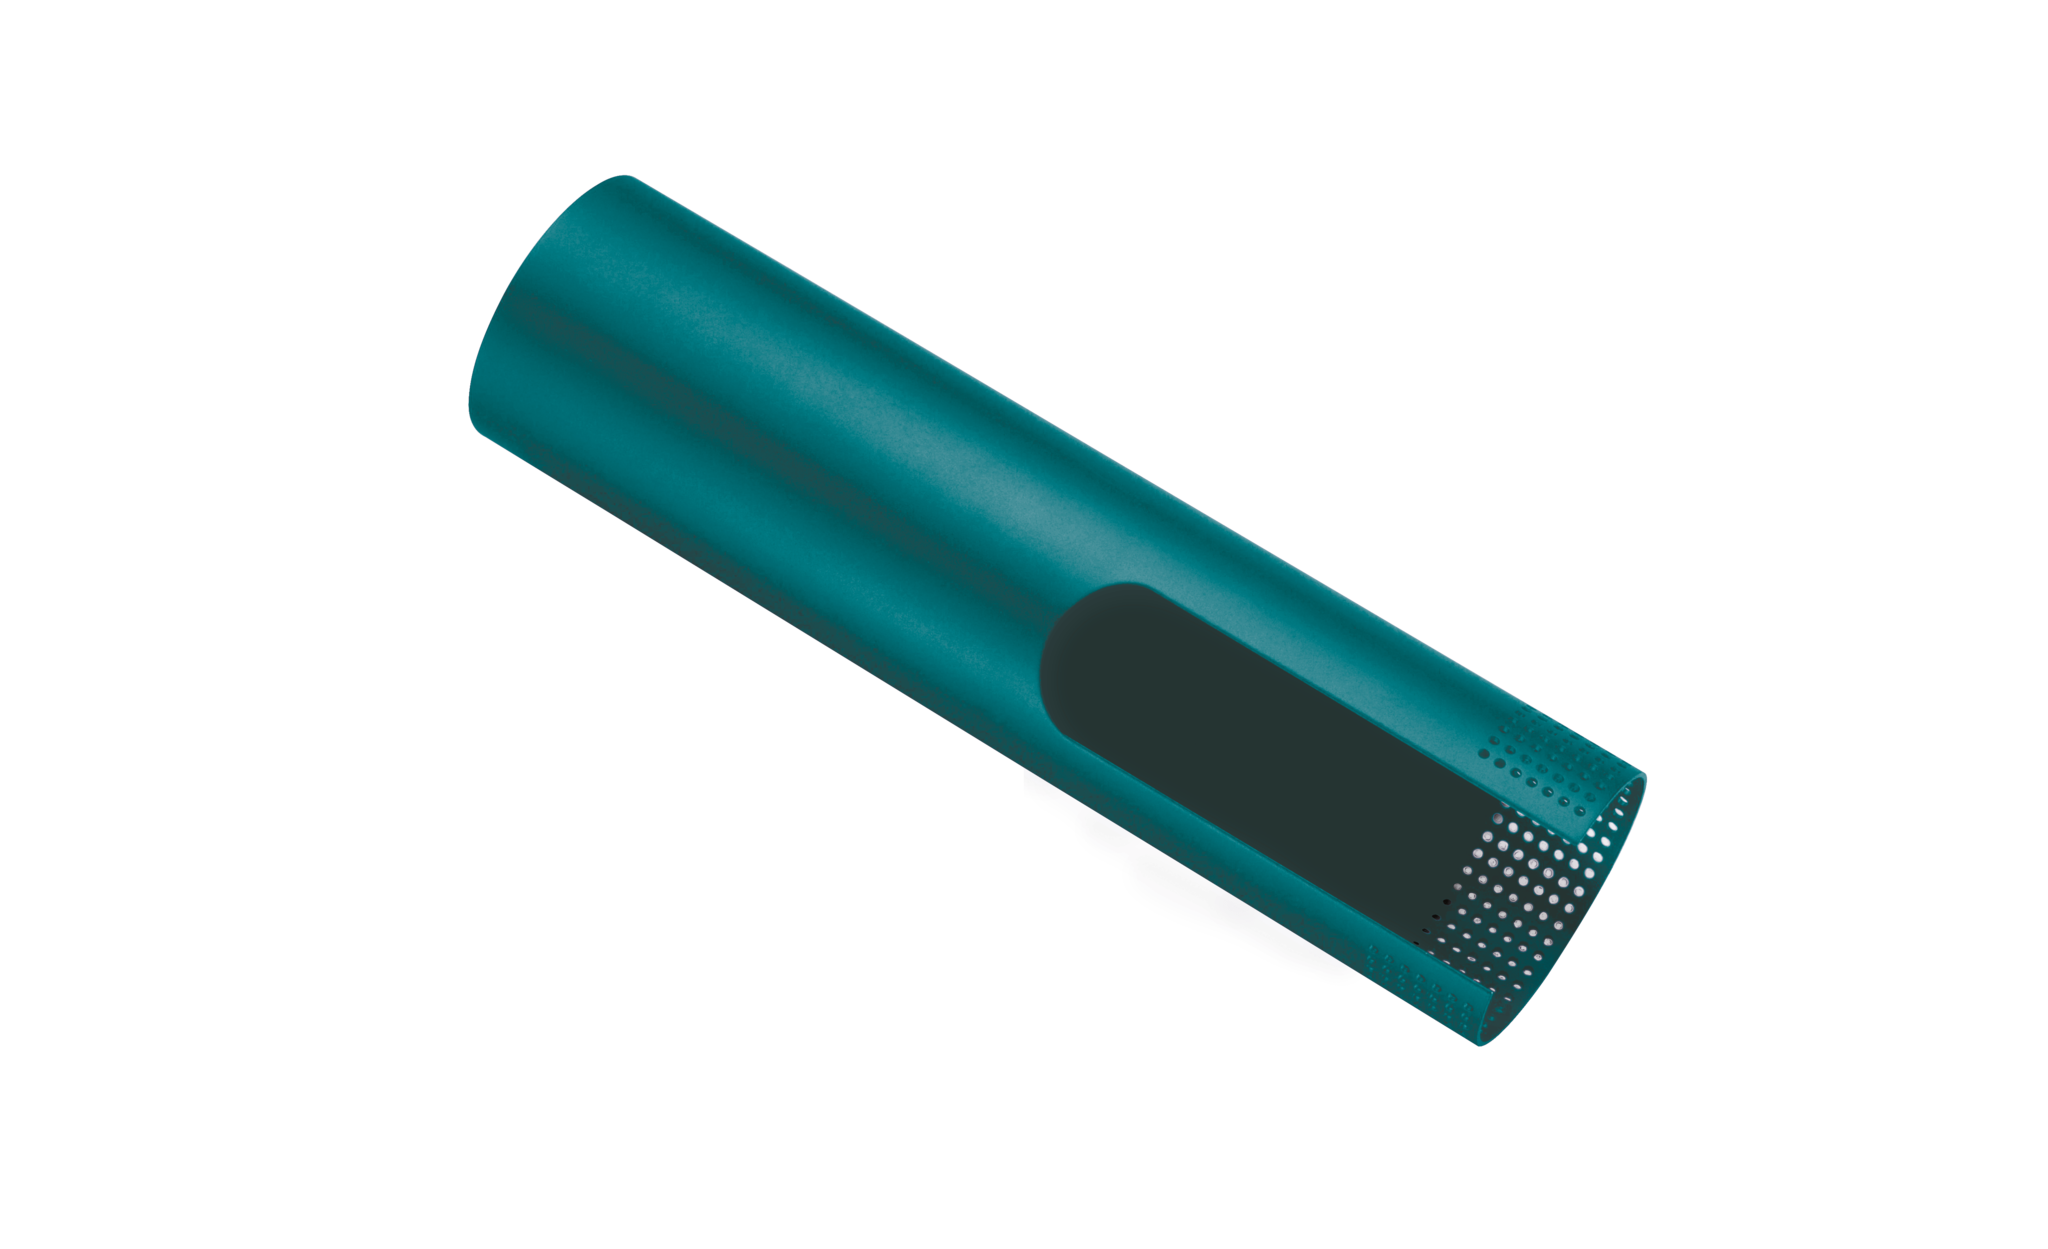 Diva Pro Atmos Dry + Style Sleeve Teal Bay